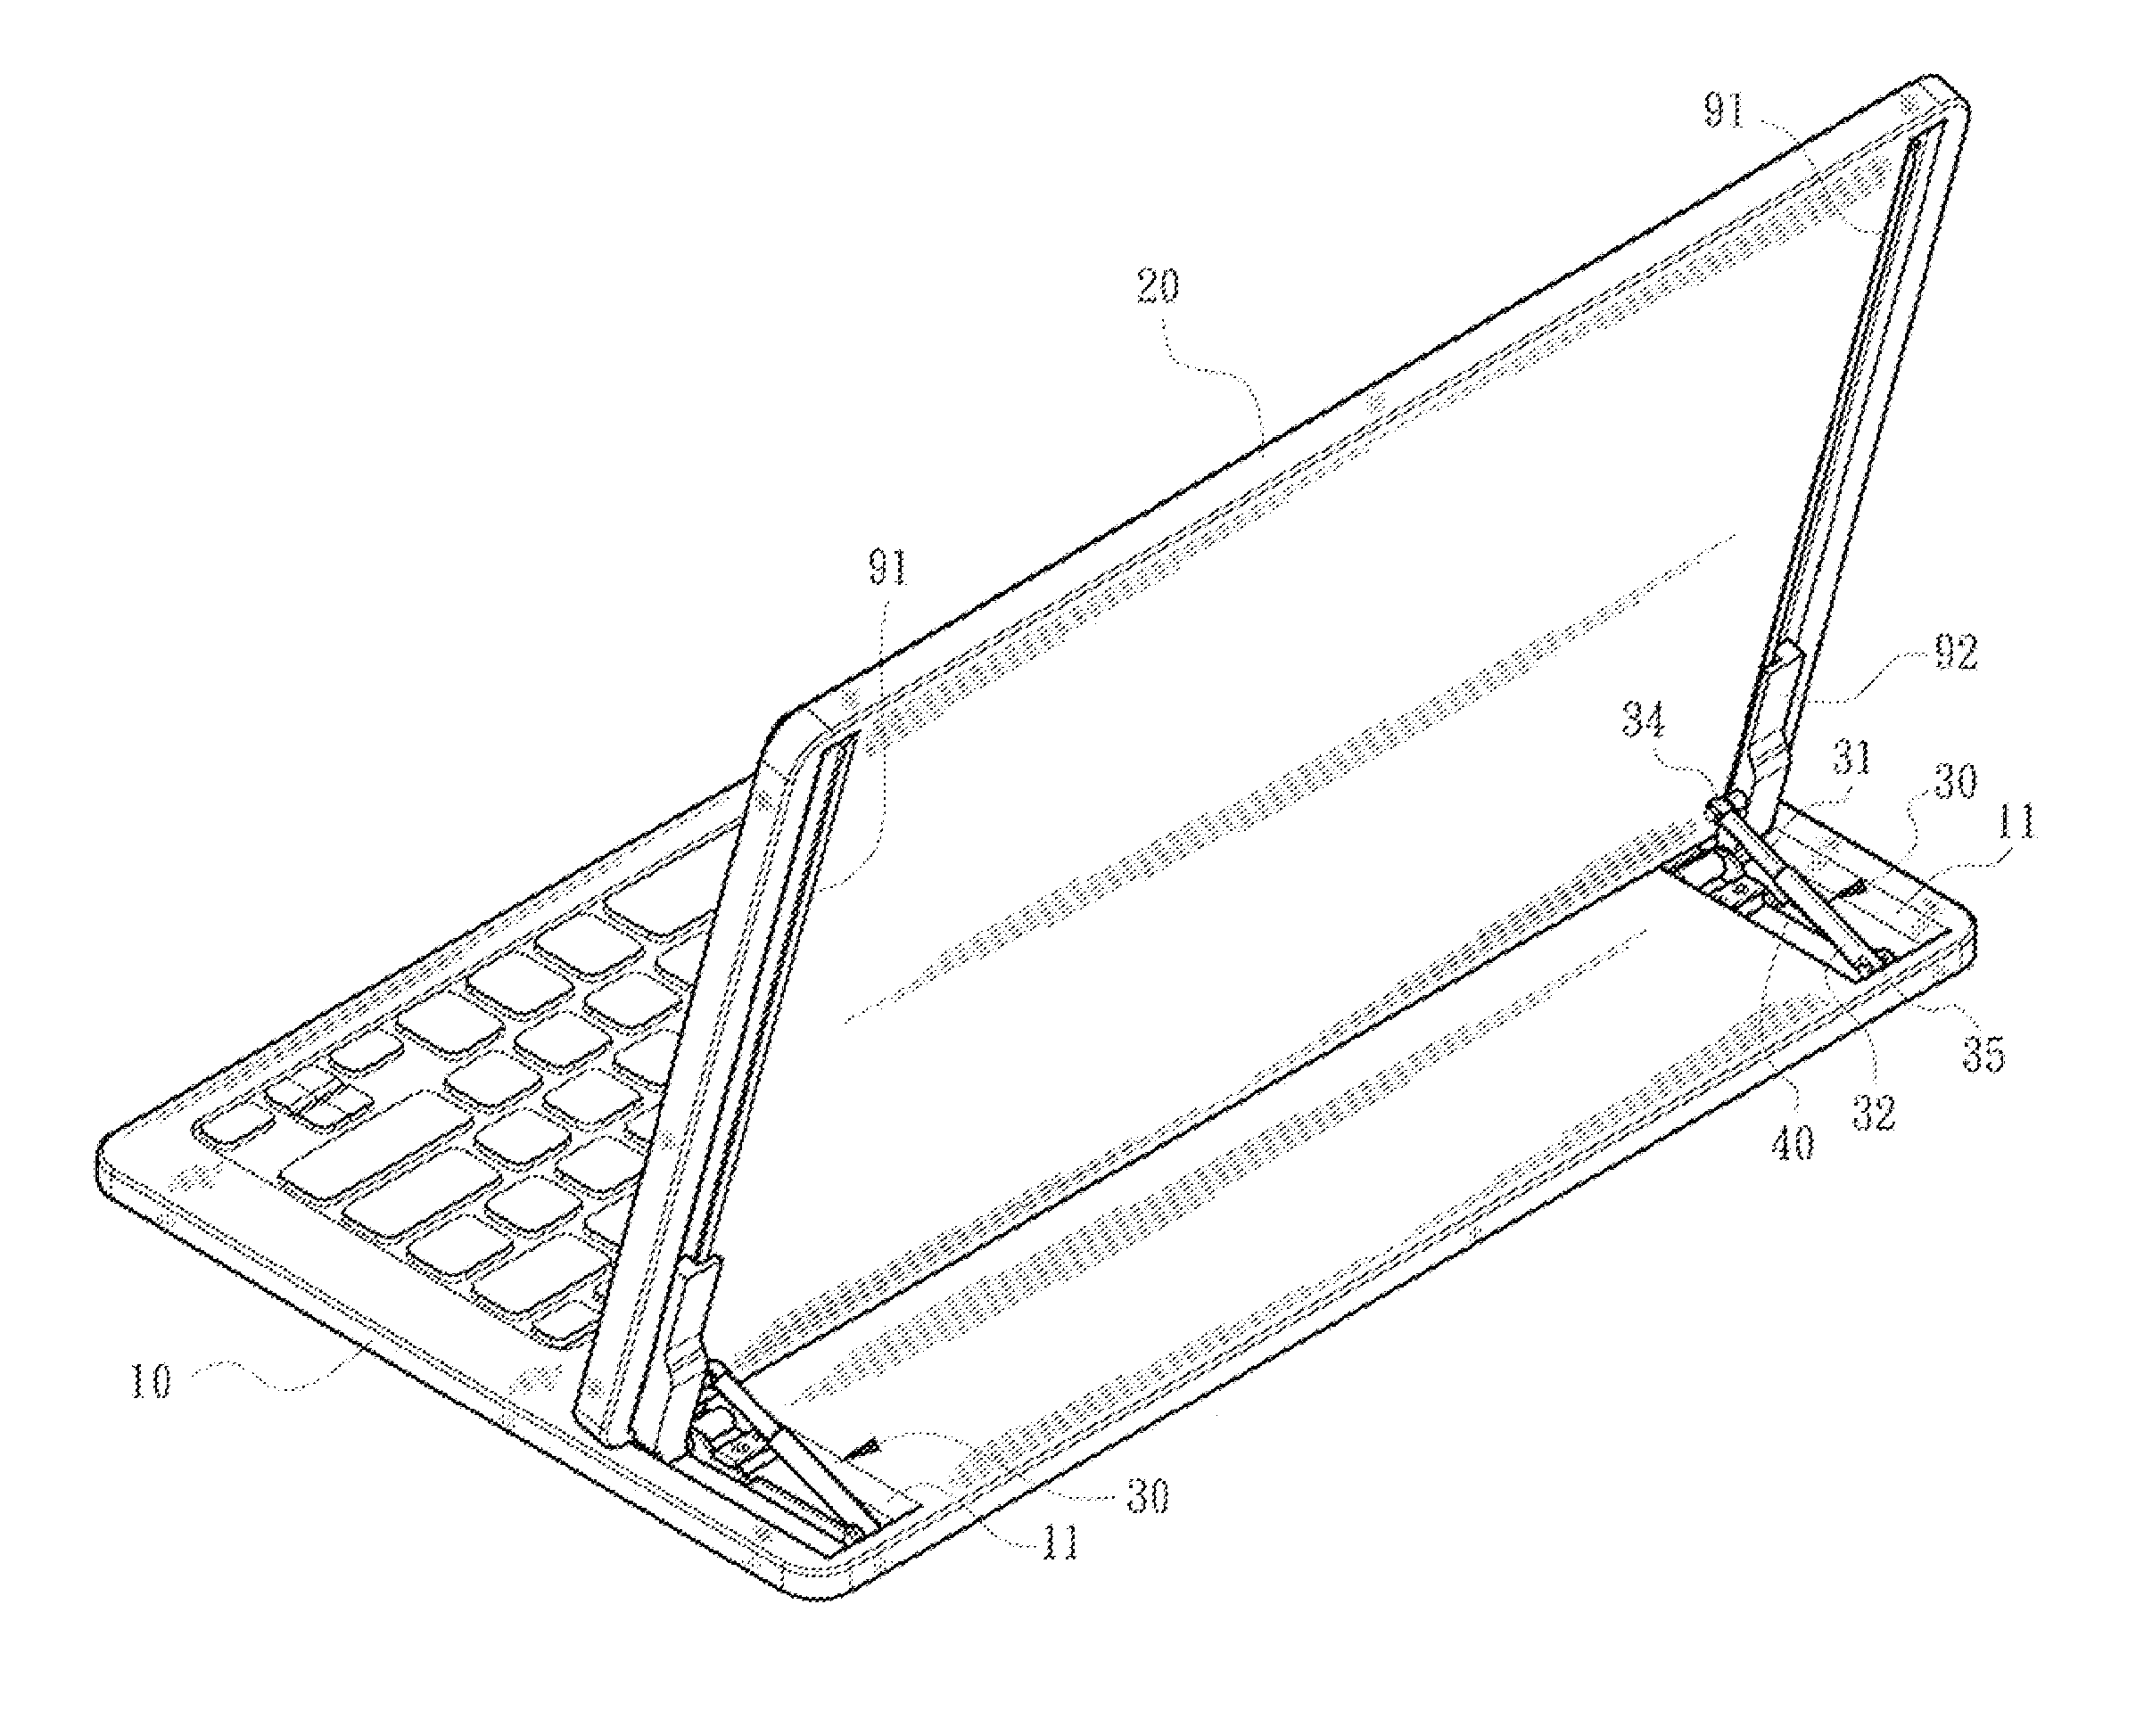 Sliding-type electronic apparatus with strengthening force structure